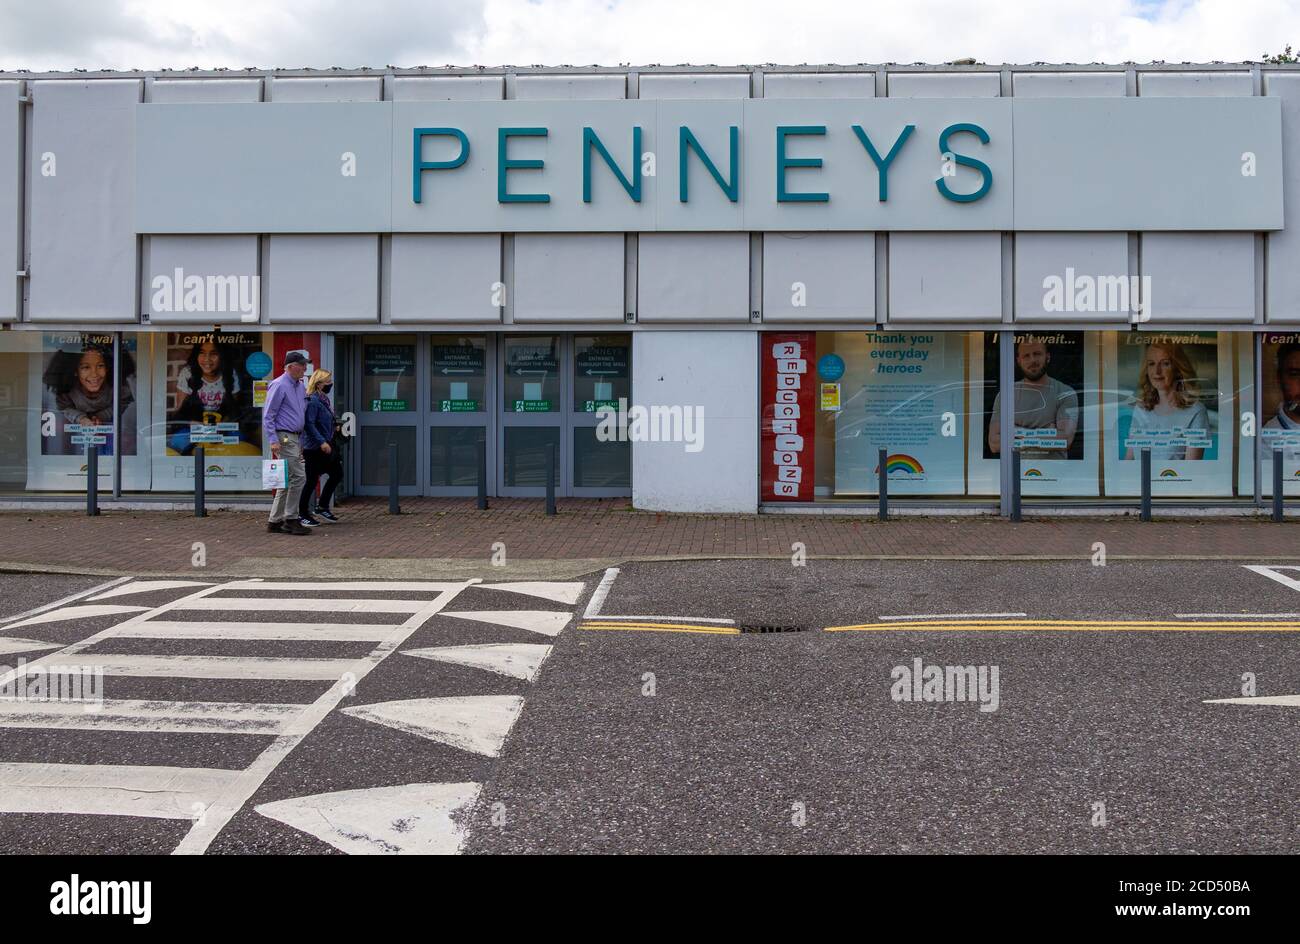 Penneys discount retail store front or shop front Stock Photo